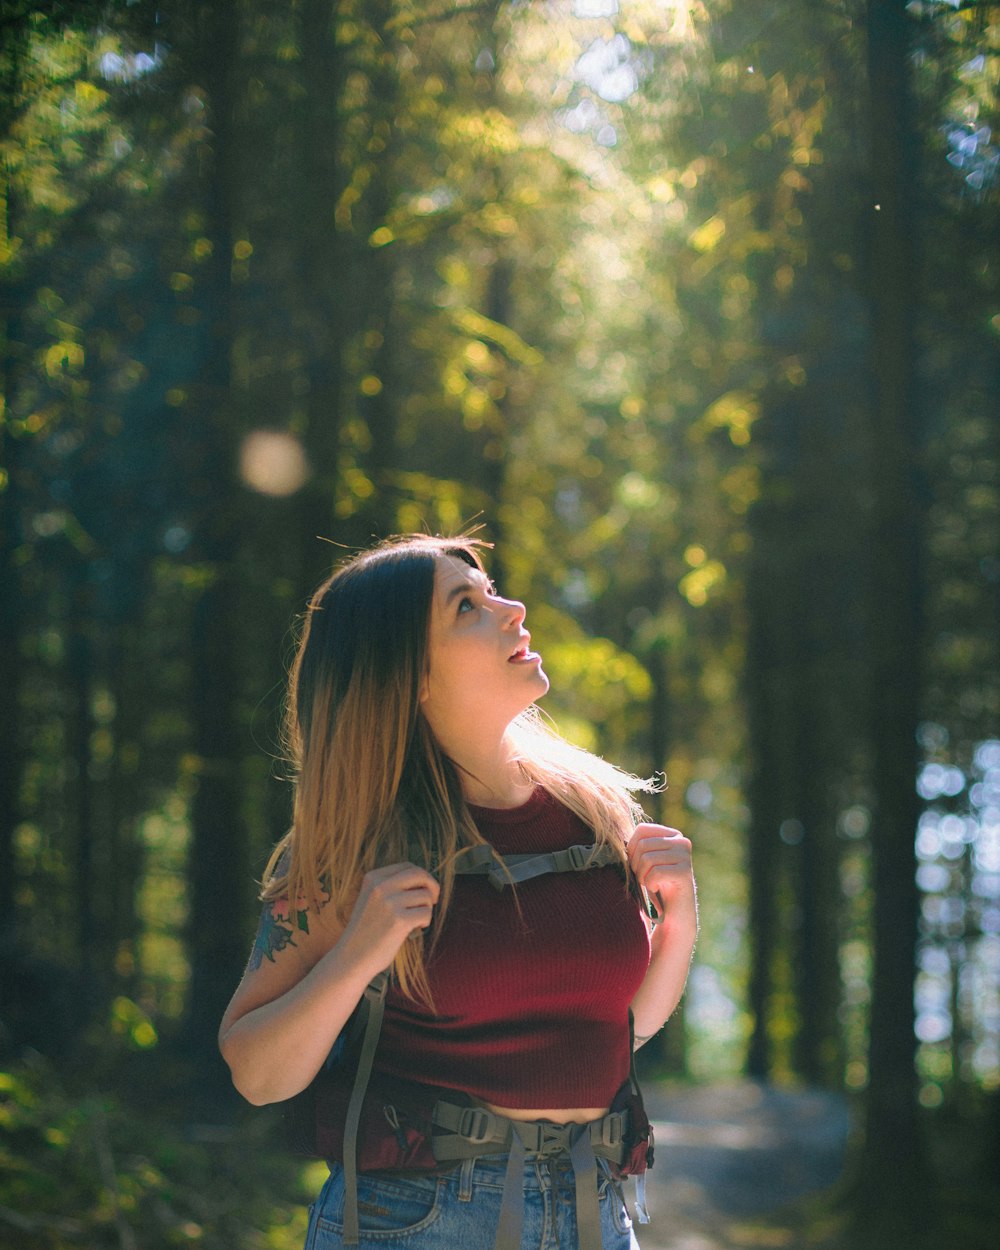 woman in red sleeveless top standing near green trees during daytime